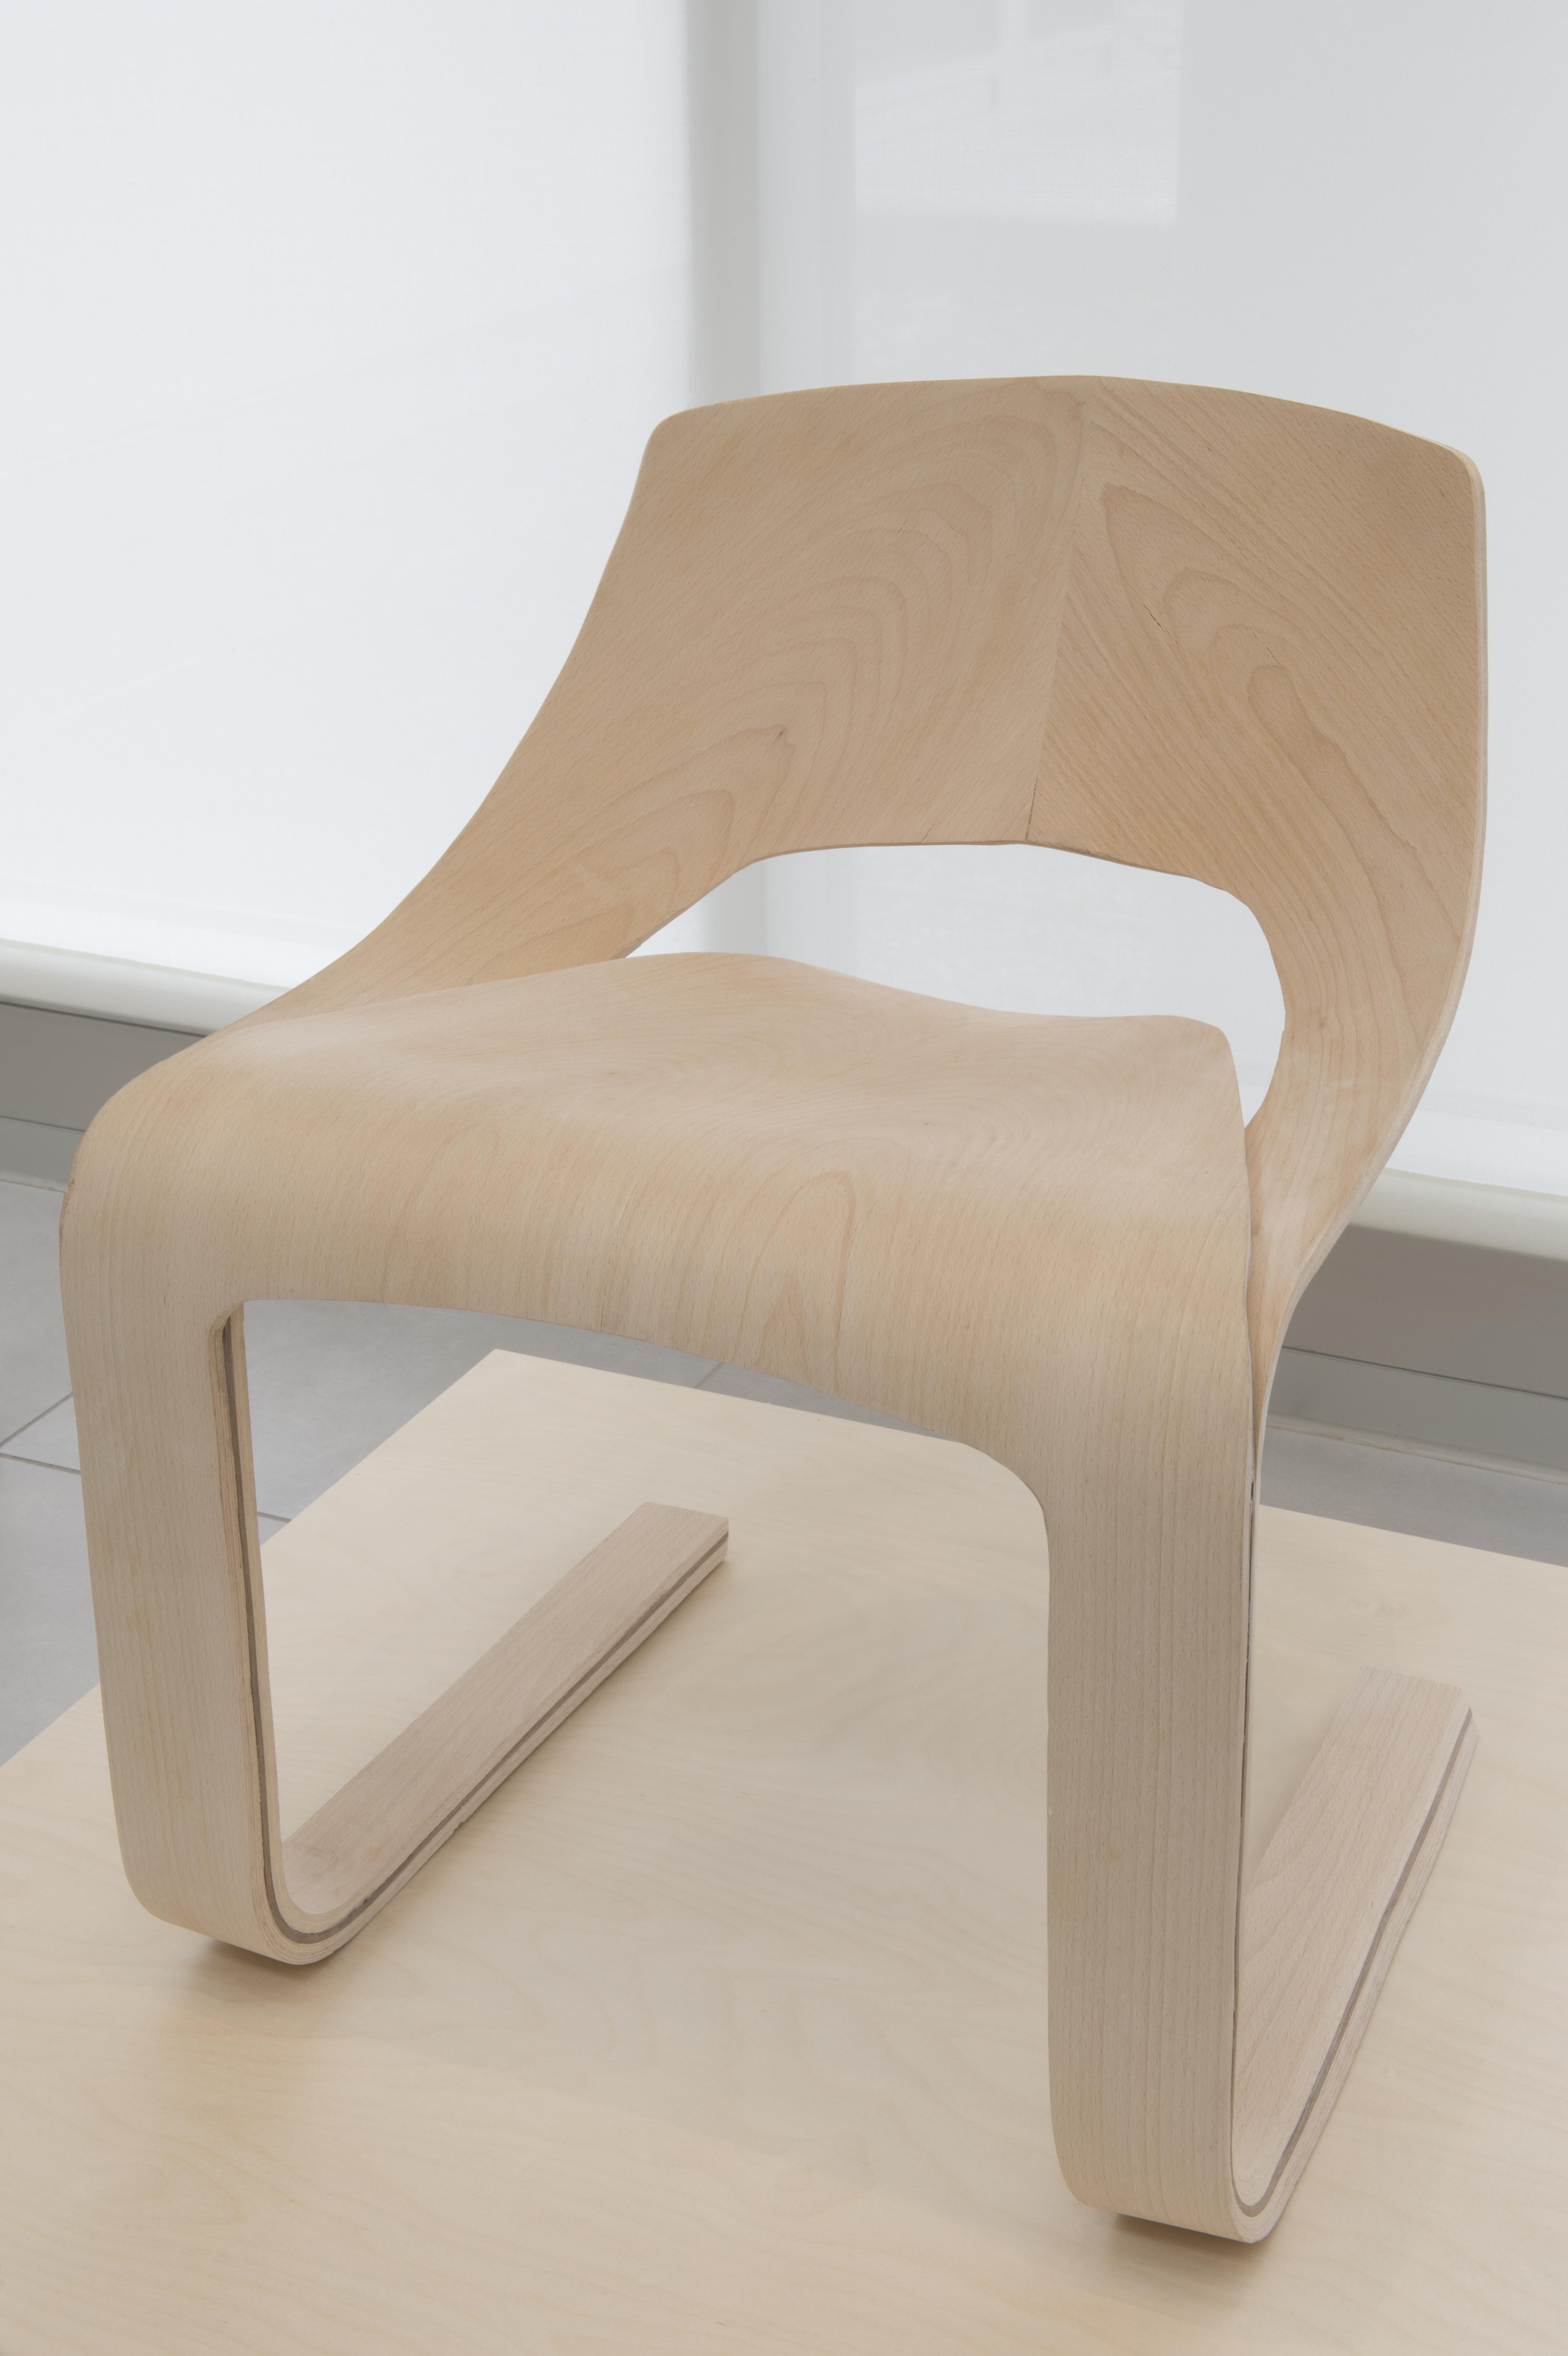 A chair on display in University Gallery.